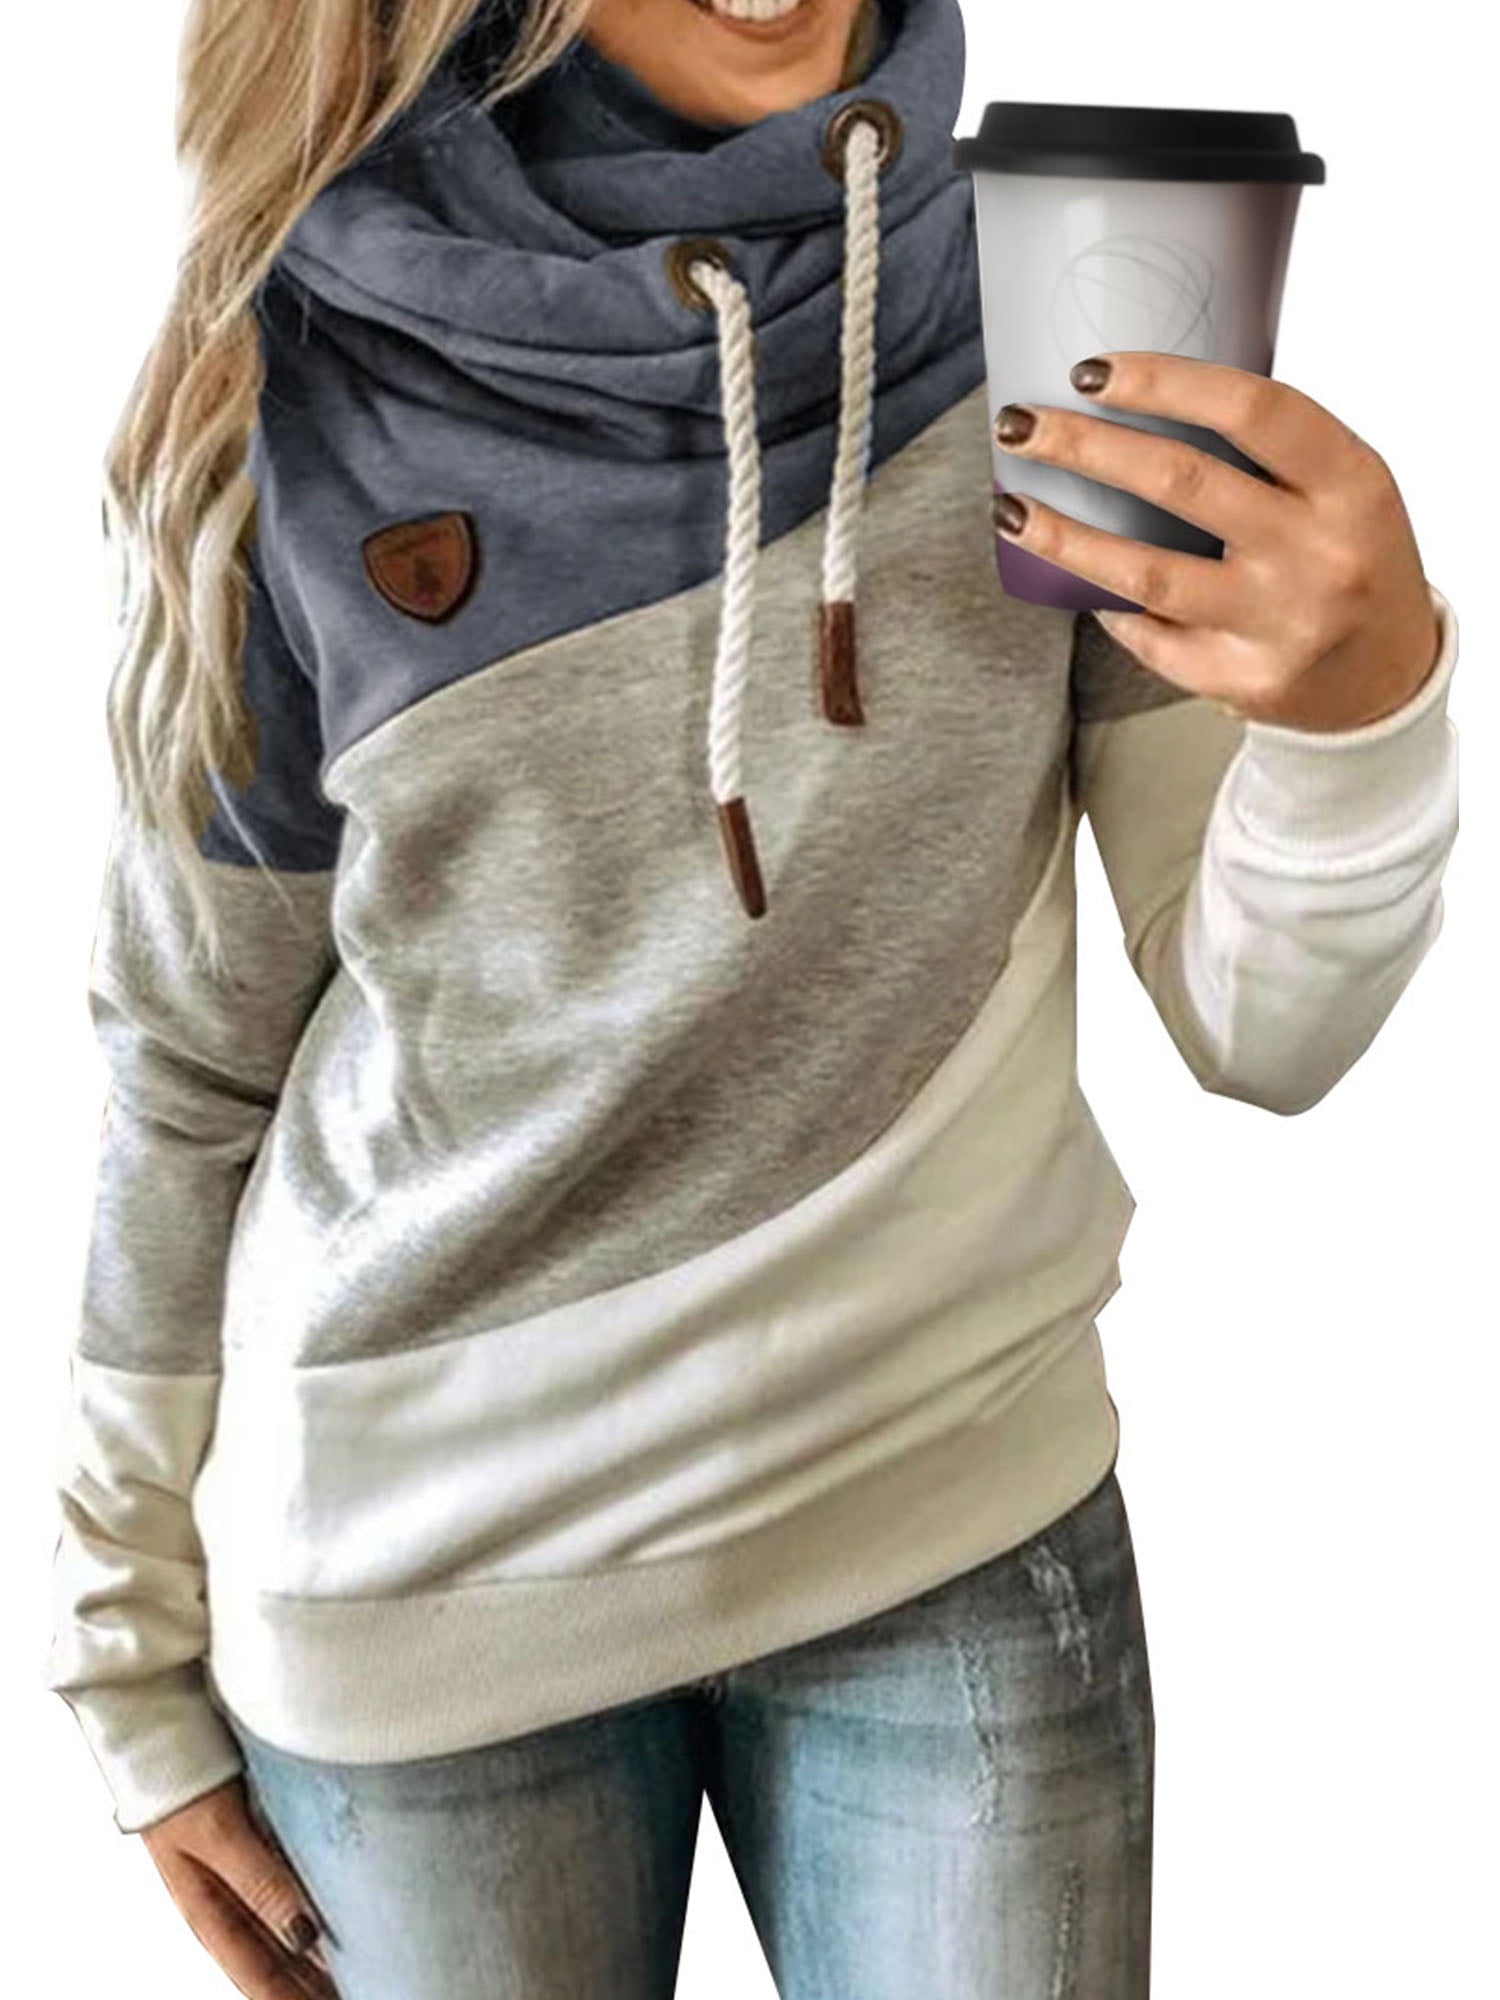 Women Casual Solid Print Cowl Neck Hoodies Sweatshirt with Hooded Tops with Pockets Blouse Pullover 